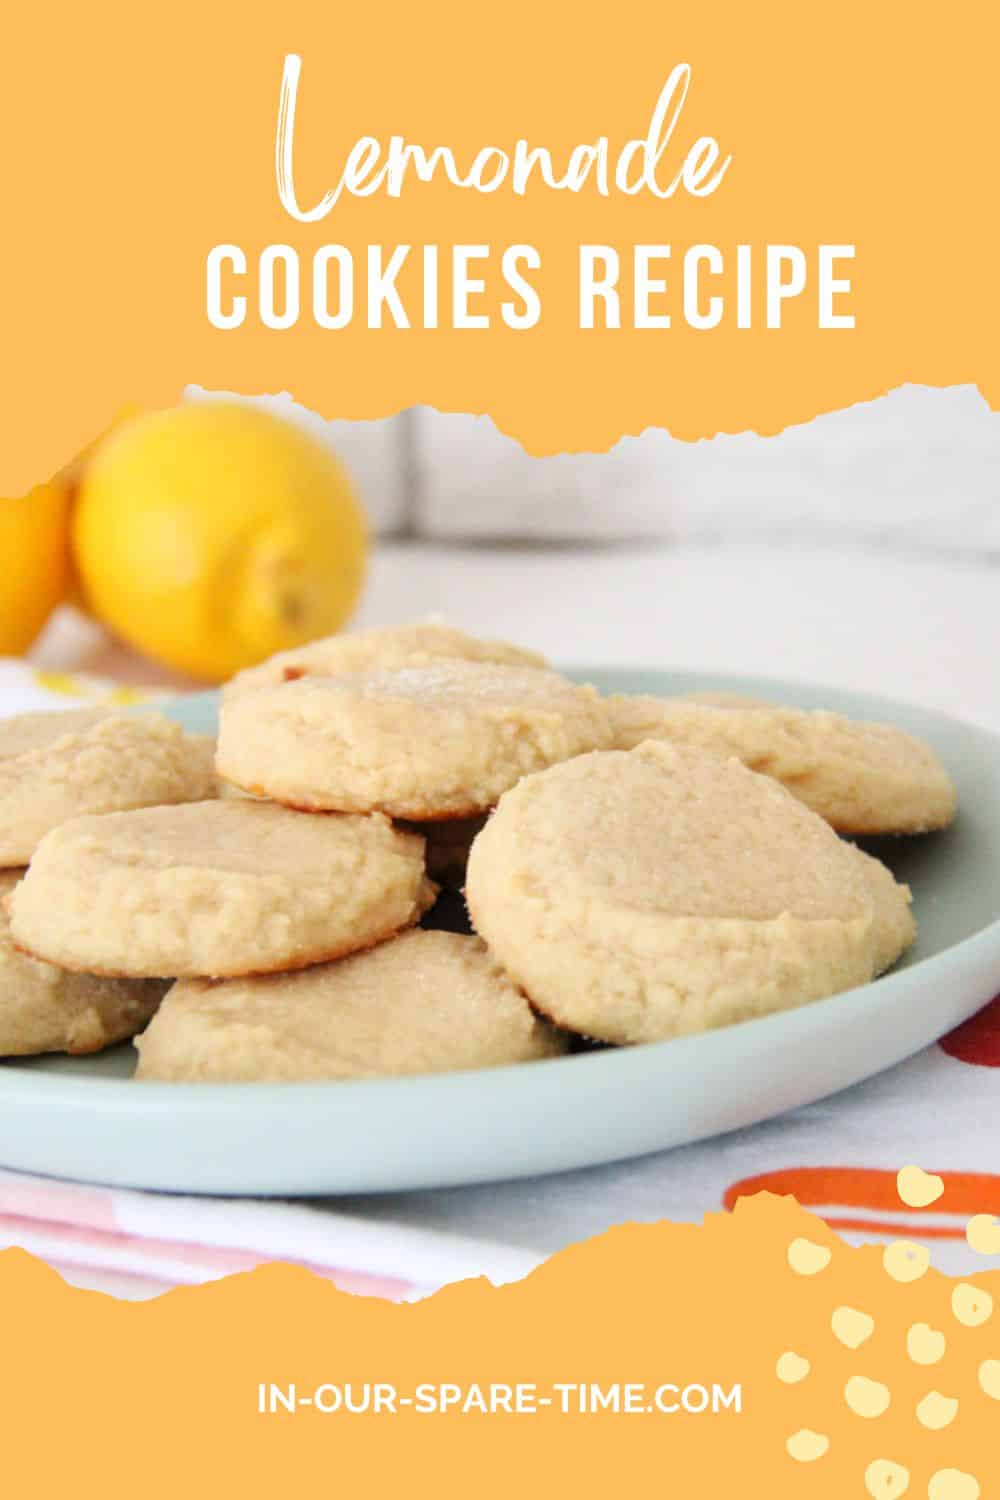 These lemonade cookies have a bright citrusy taste and are so easy to make. Welcome spring with a batch of these delicious citrus cookies.